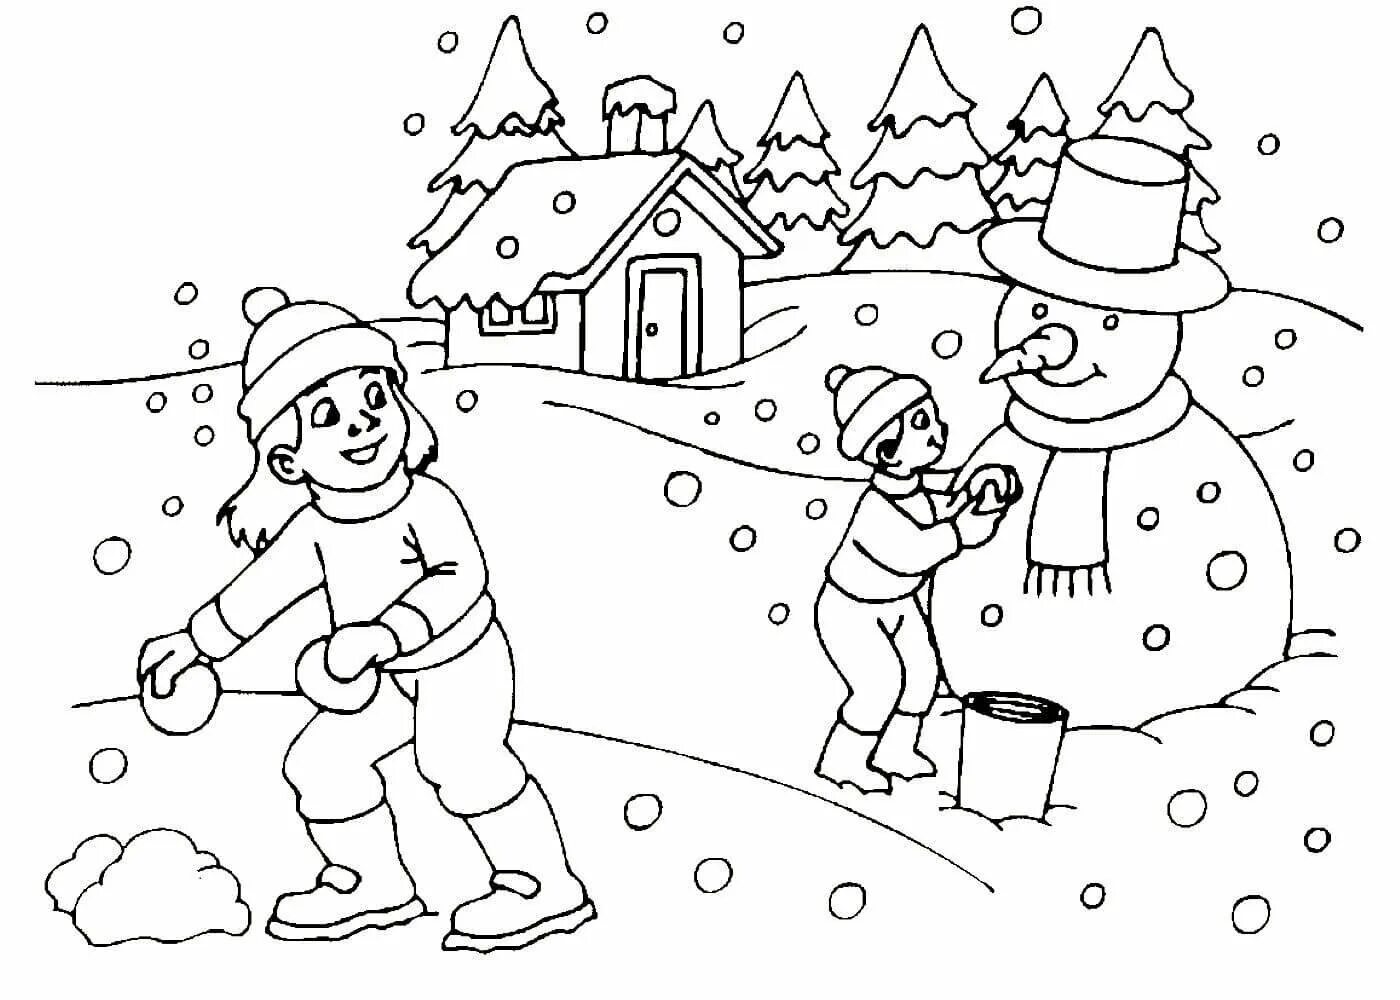 Merry winter coloring book for children